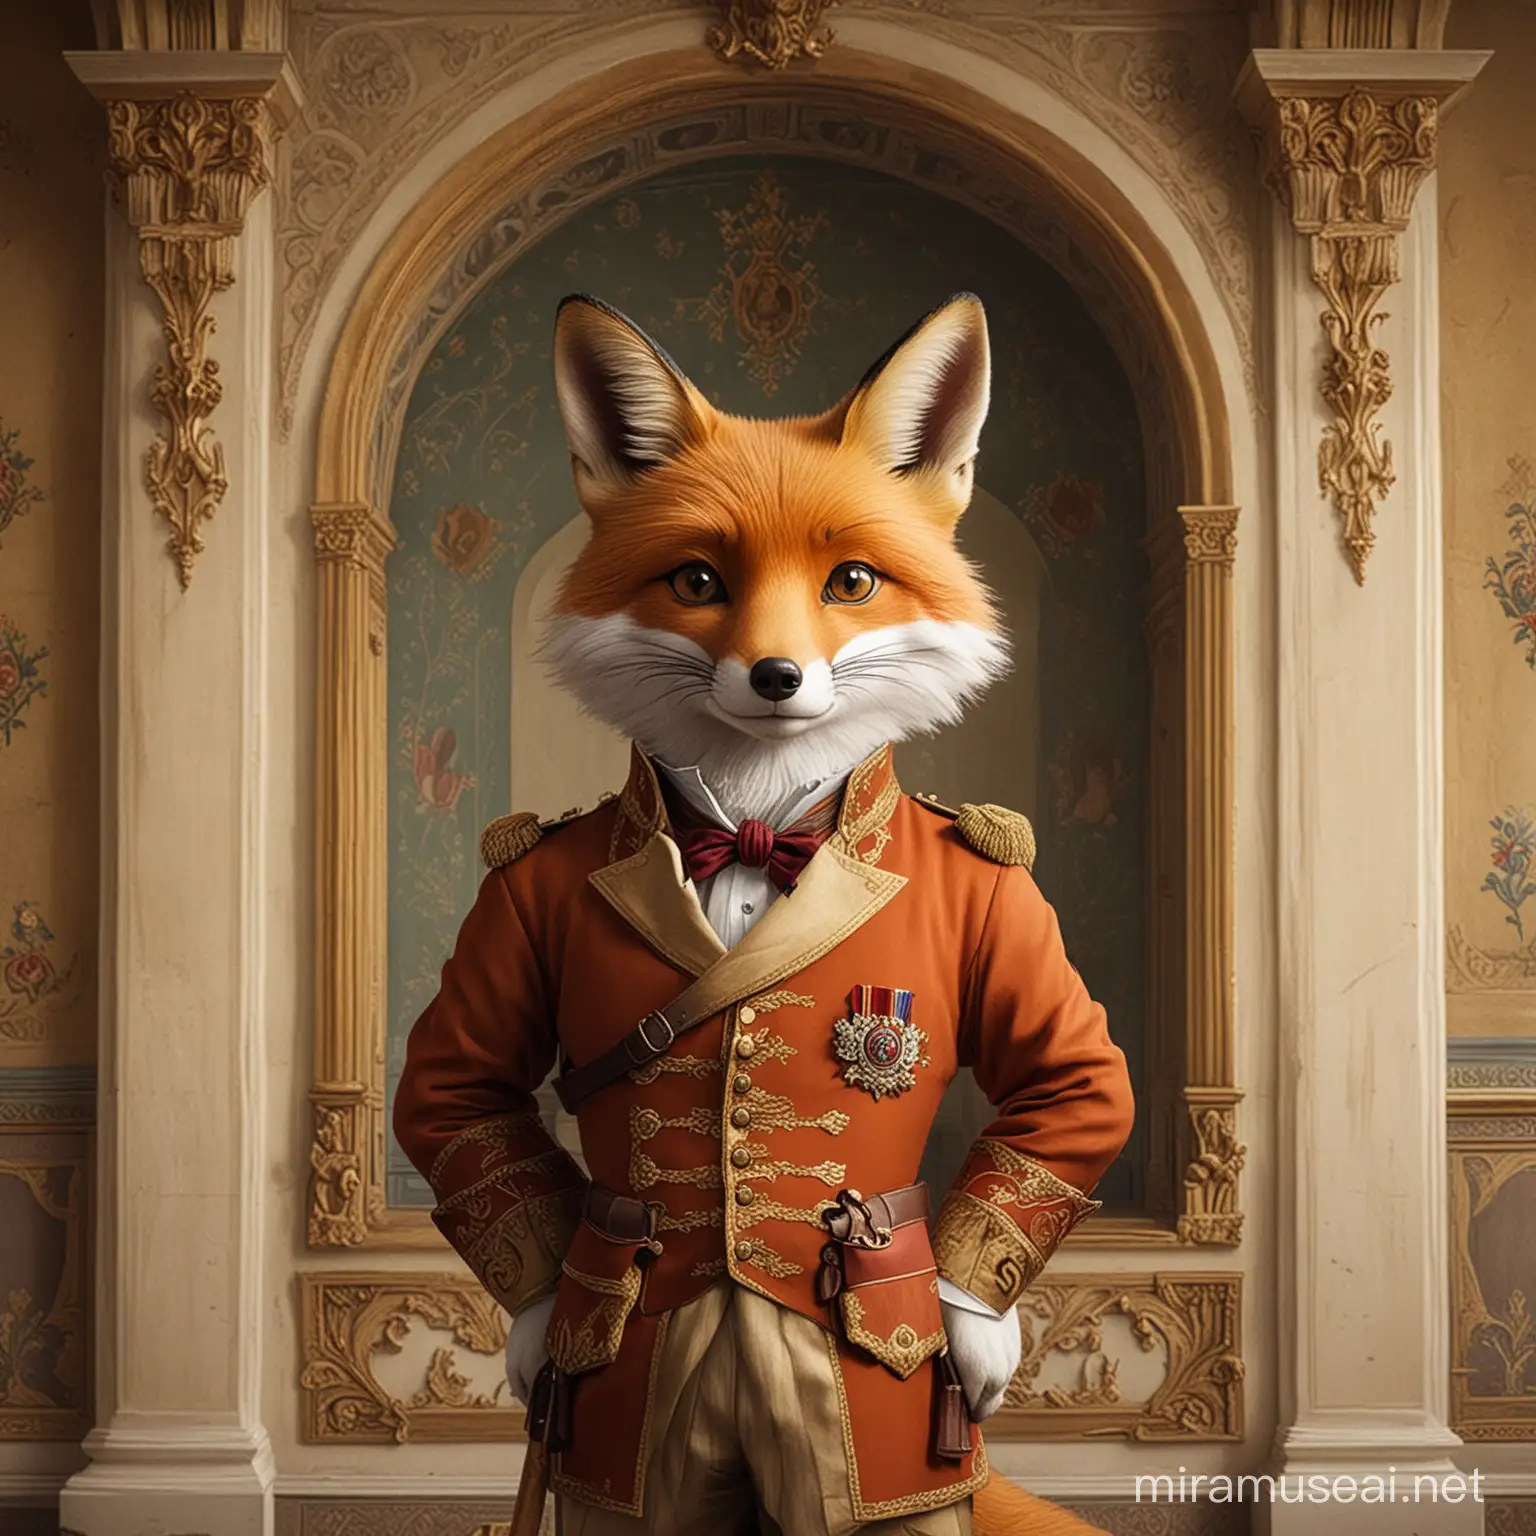 the noble class fox with cartoon image in the palace
